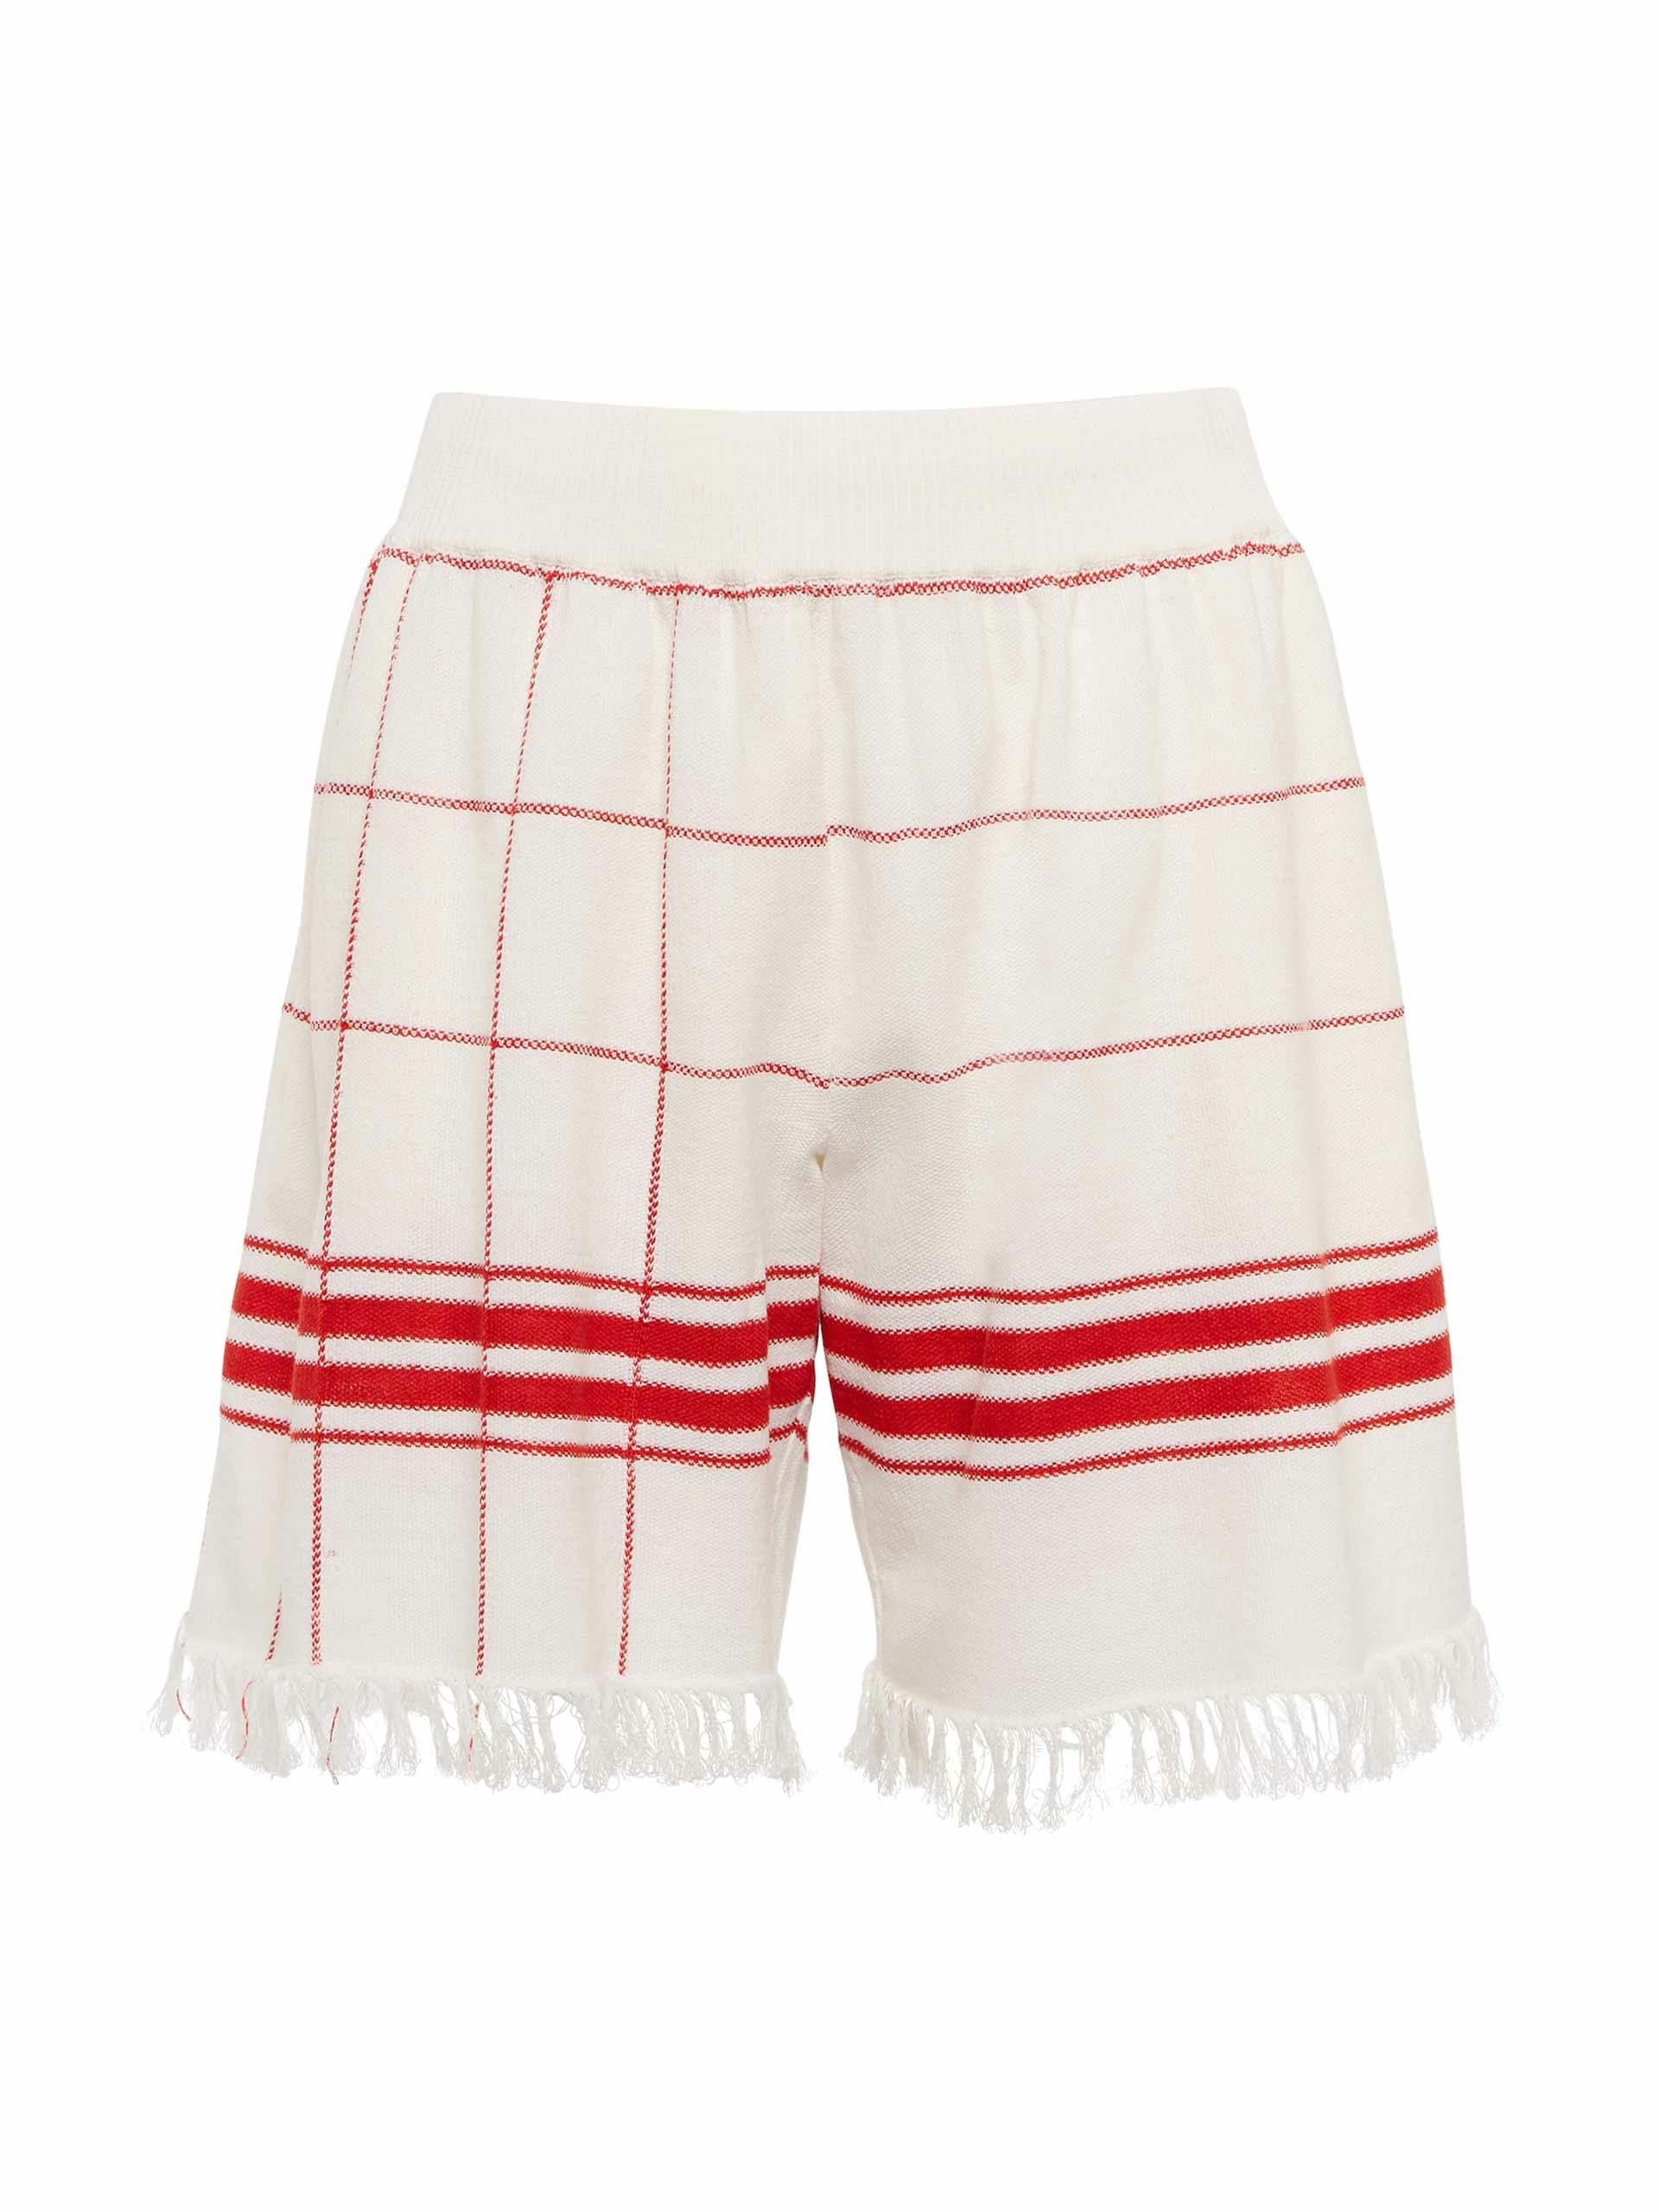 White and red checked shorts